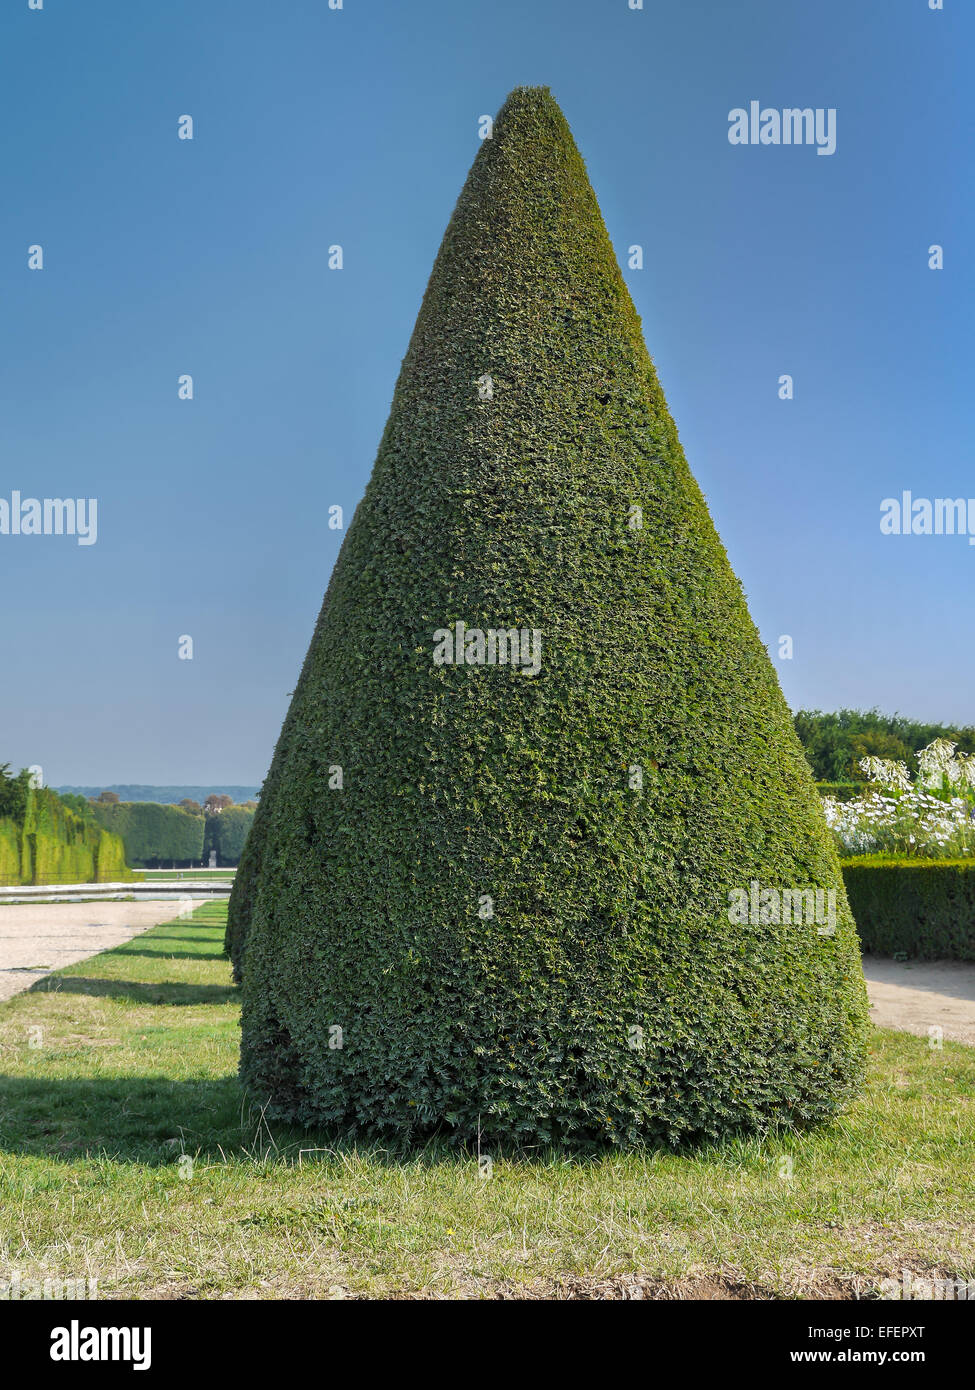 Conical evergreen trimmed shrub in Versailles garden, France Stock Photo